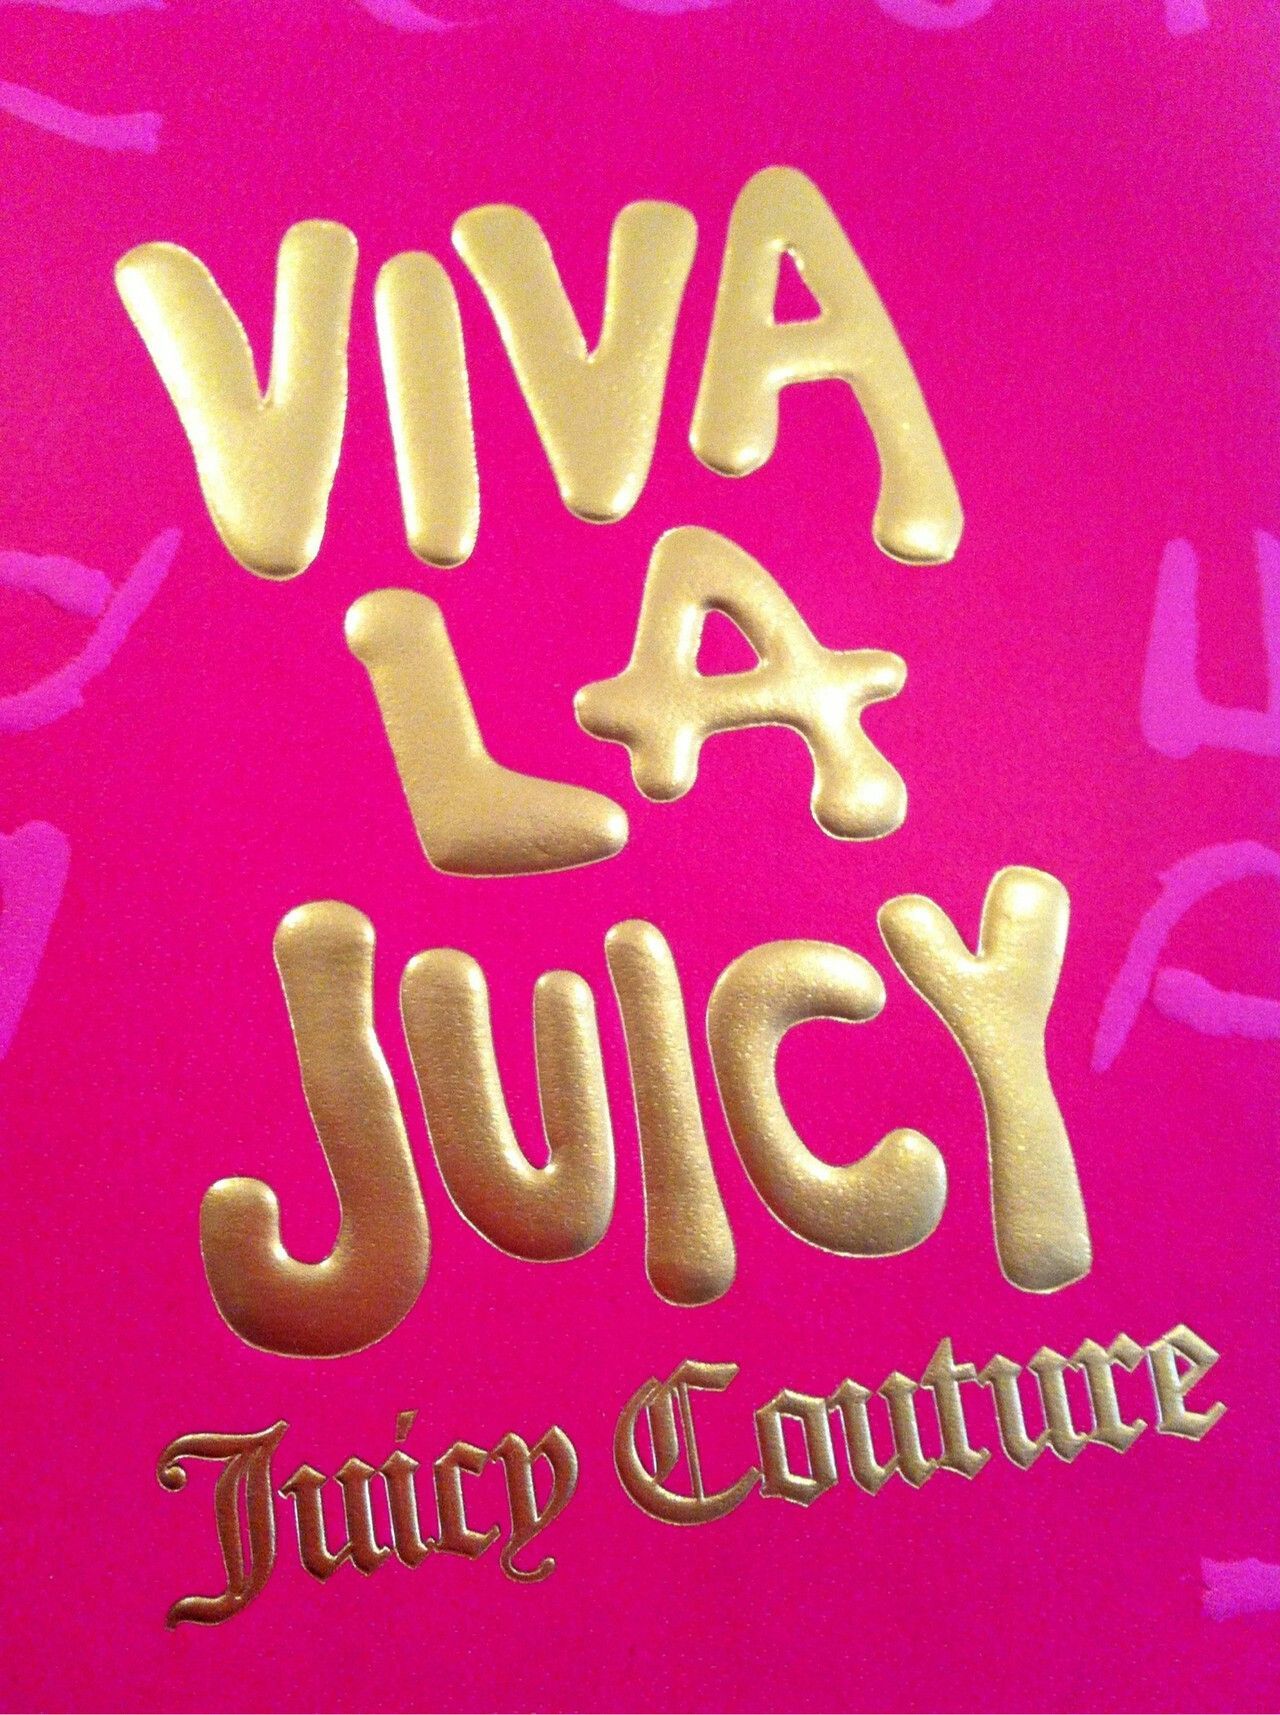 Juicy Couture Wallpaper Free Juicy Couture Background